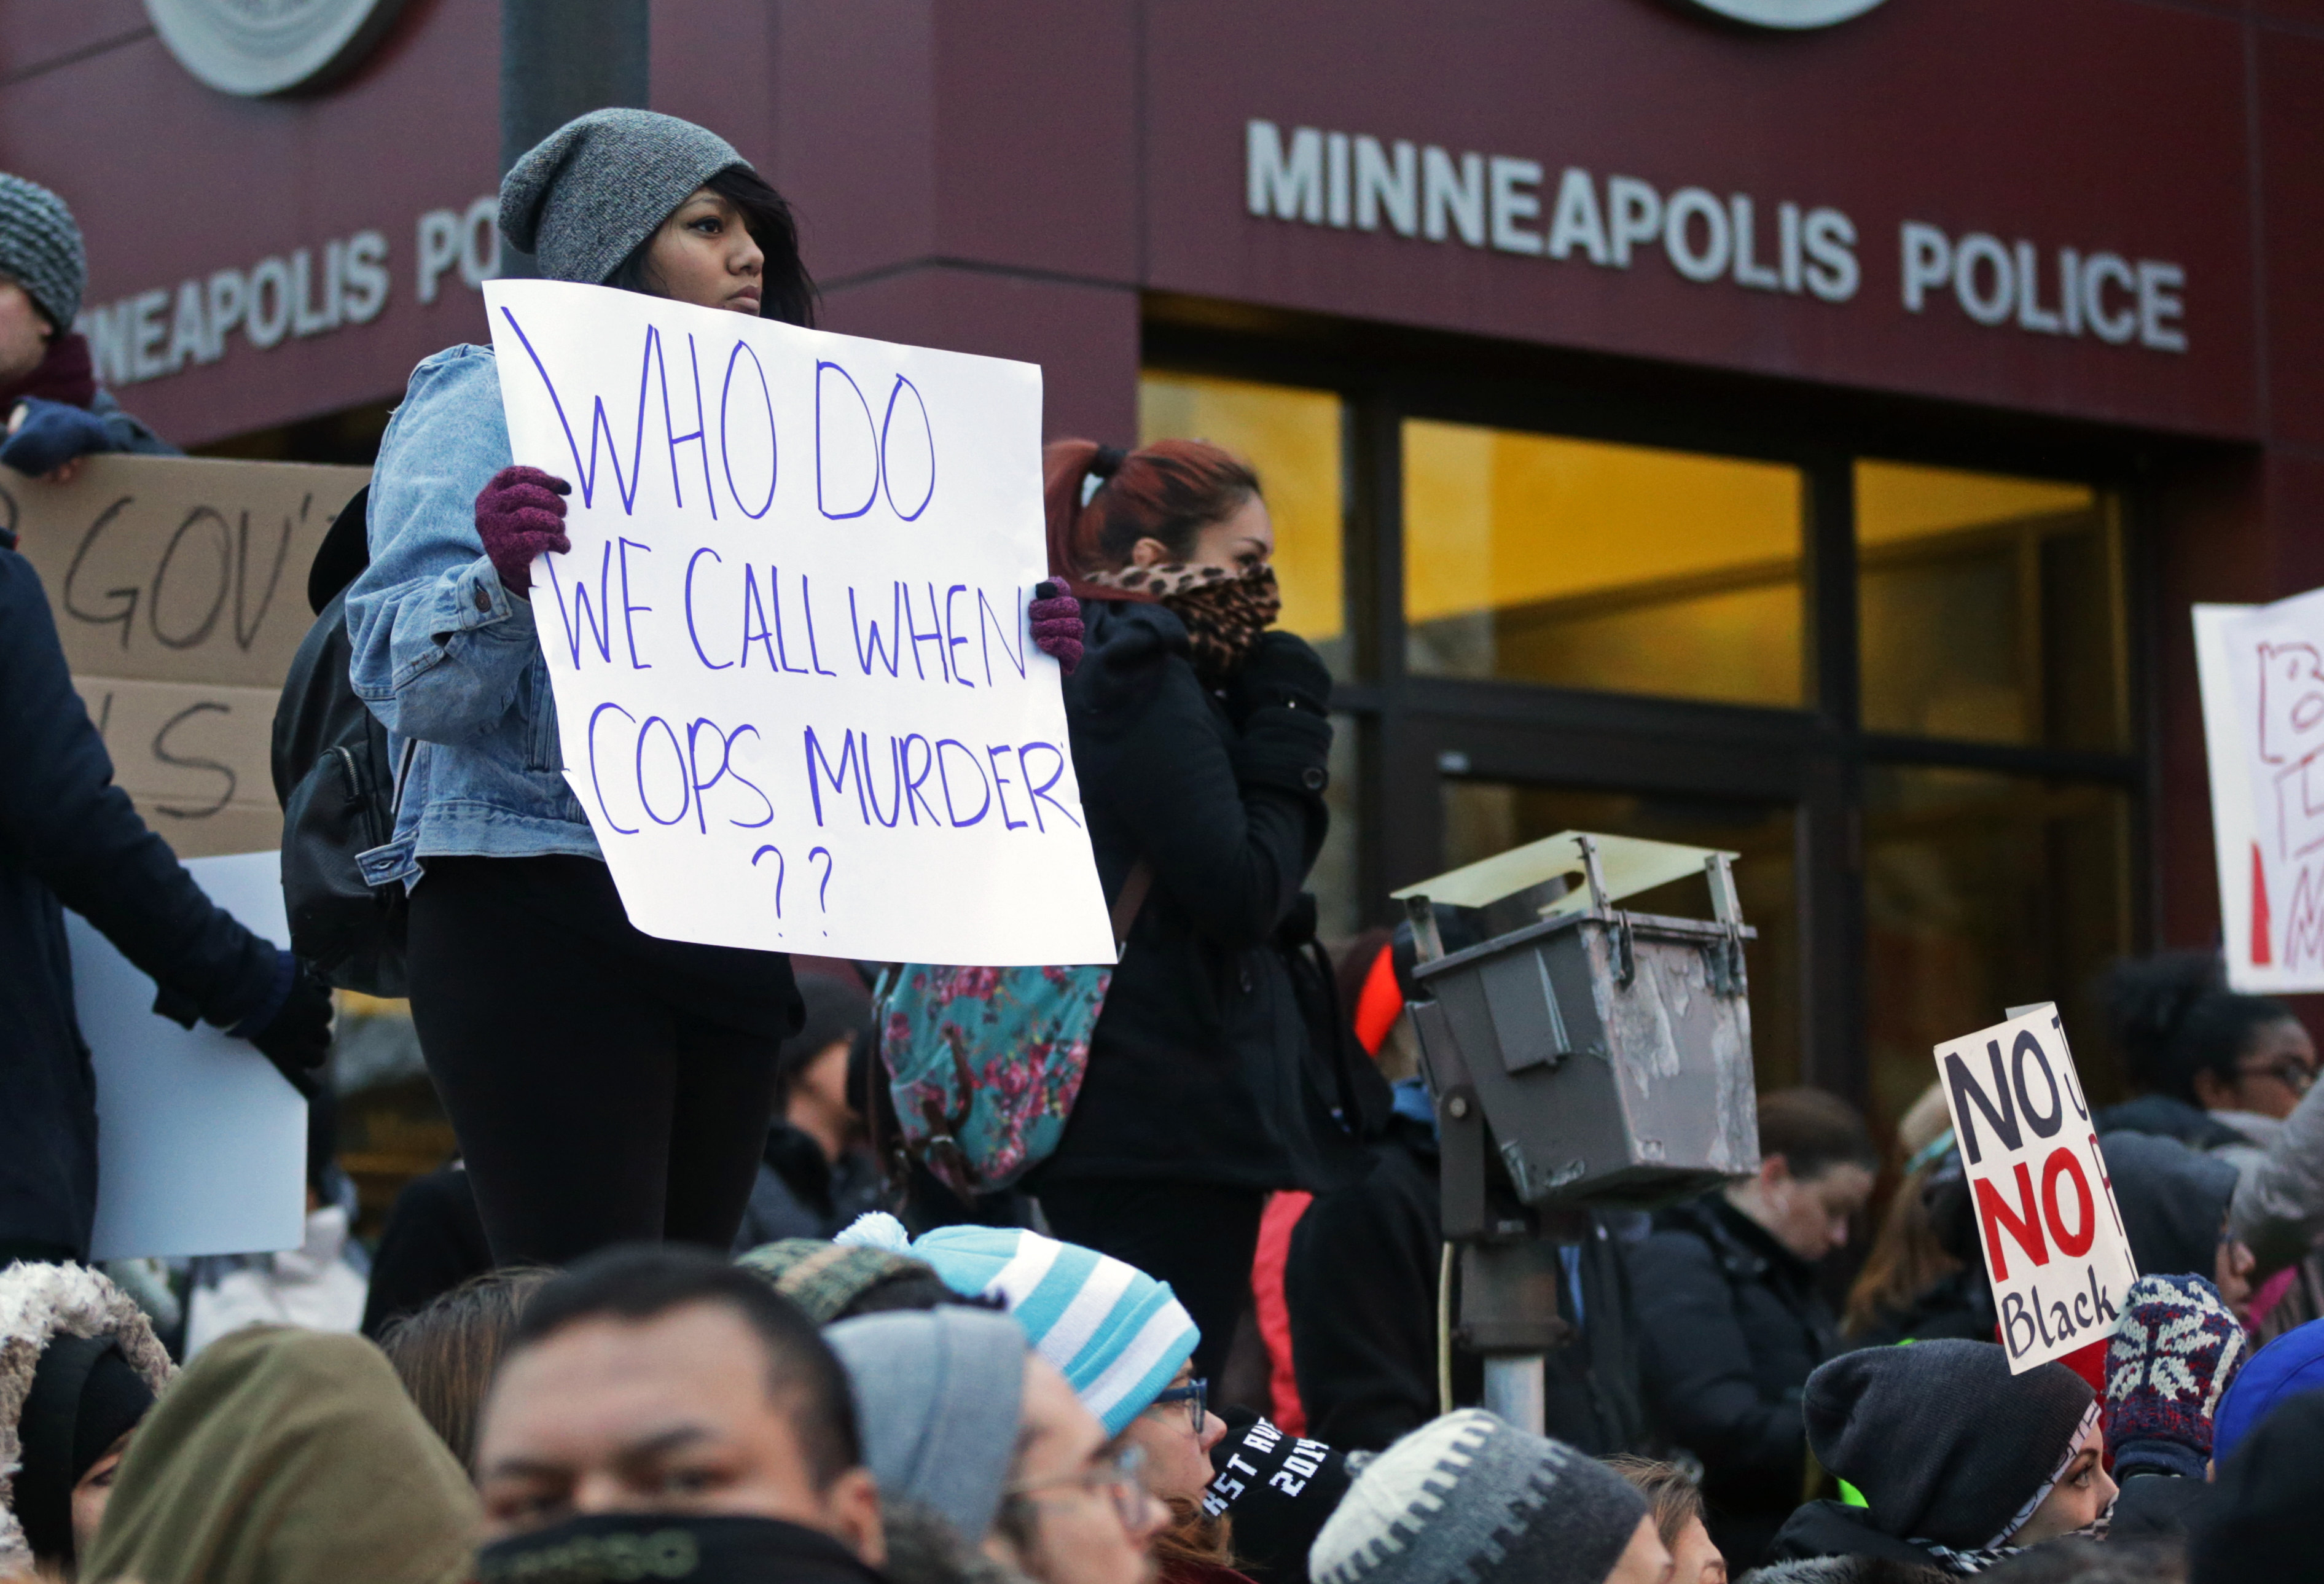 Demonstrators rally outside the Minneapolis Police Department's Third Precinct to protest police brutality, on Nov. 25, 2014, in Minneapolis. (Jim Mone—AP)